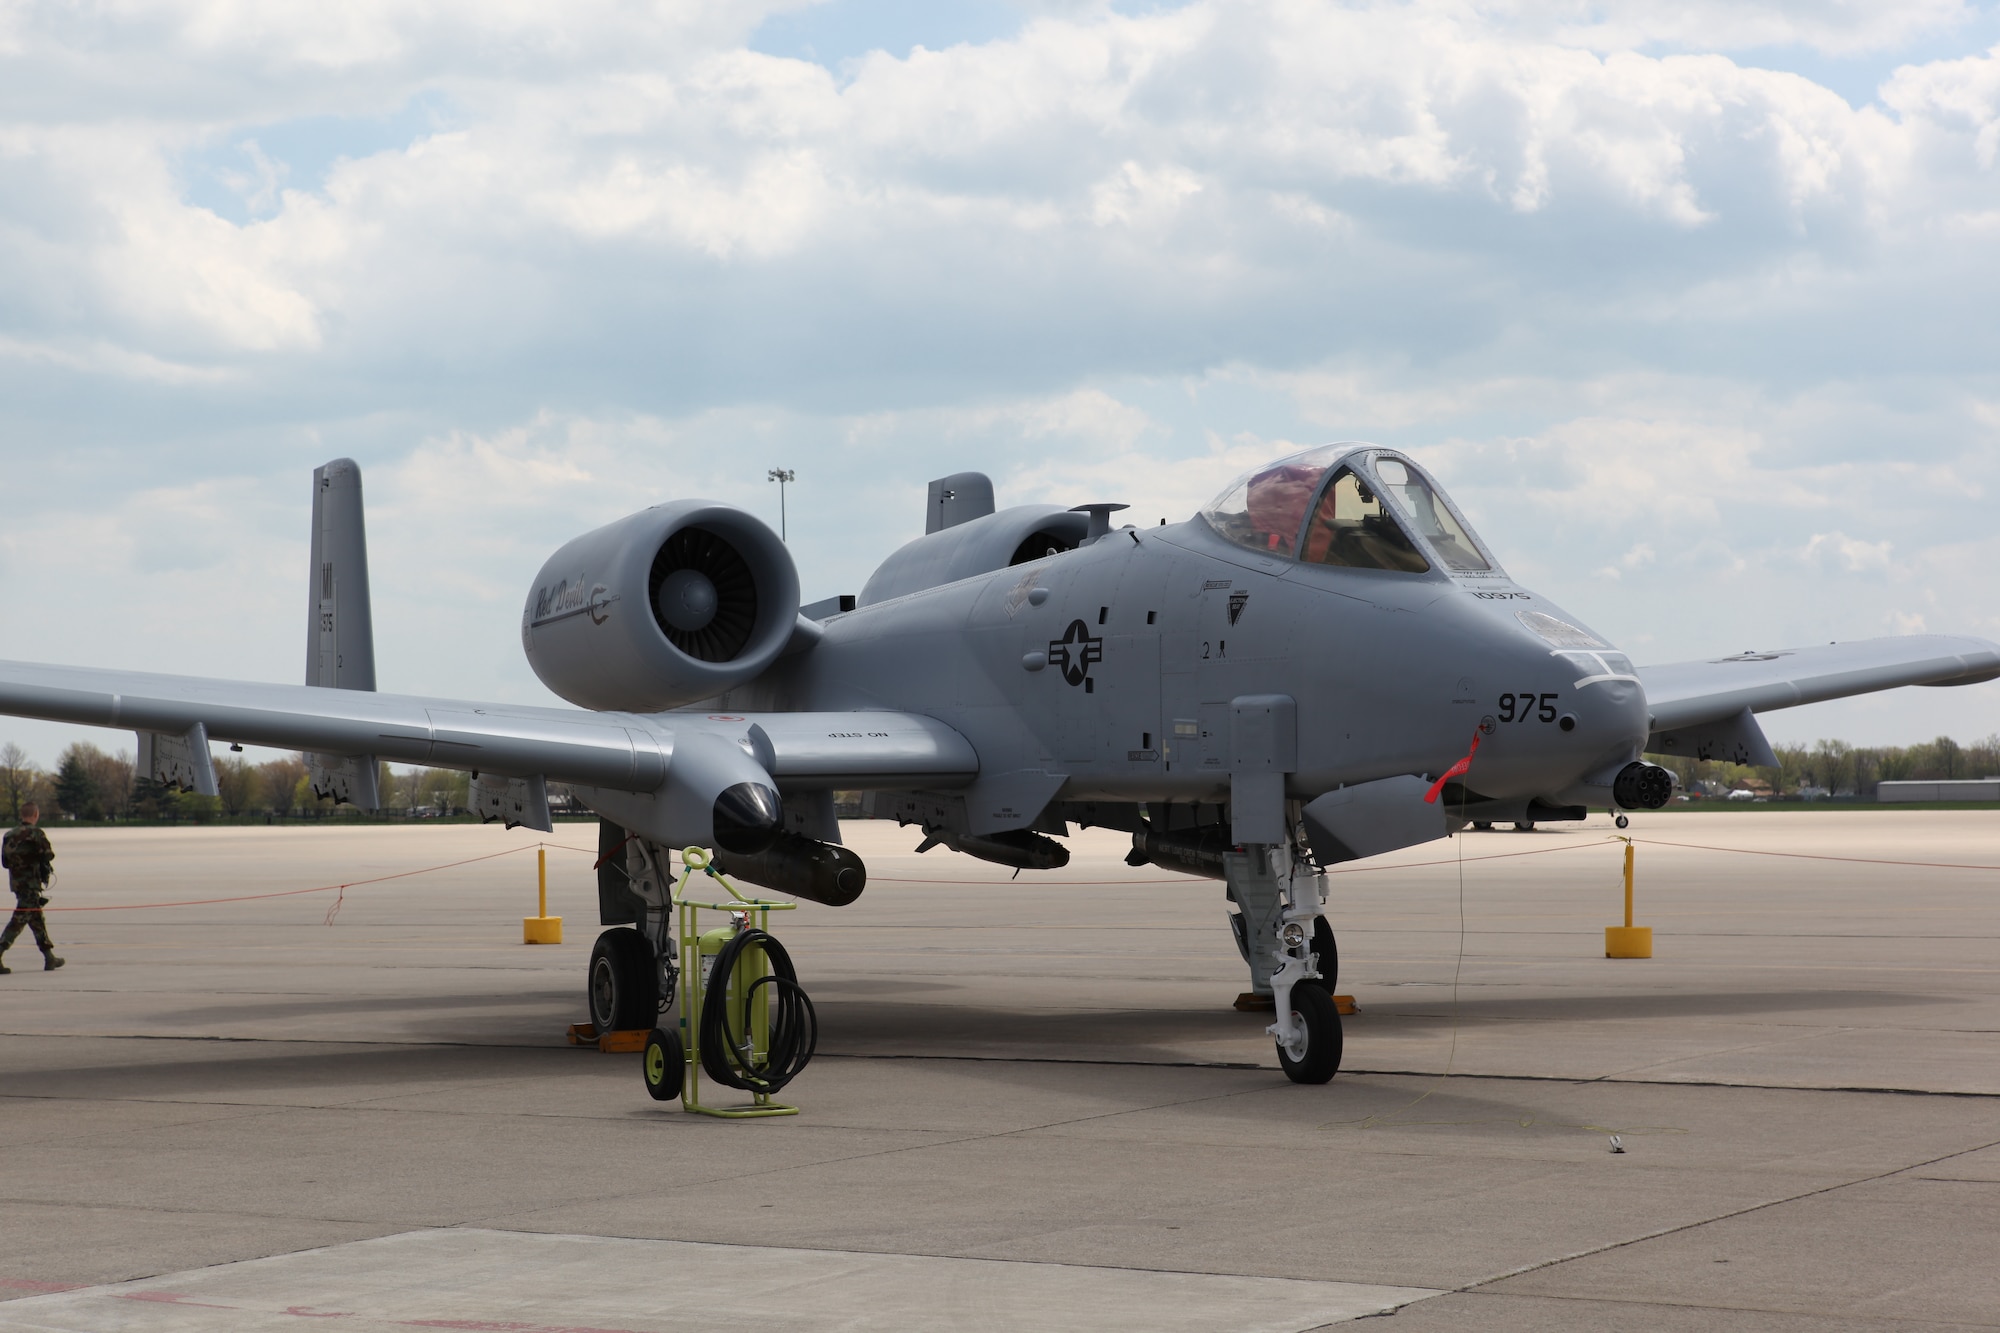 An A-10 Thunderbolt II parked on the ramp at Selfridge Air National Guard Base. Selfridge is now the home base for a squadron of A-10s, after the Michigan Air National Guard’s 127th Wing completed the transition to the A-10 from flying the F-16 Fighting Falcon for almost 20 years. The Wing also flies the KC-135 Stratotanker. (U.S. Air Force photo by Technical Sgt. David Kujawa) 